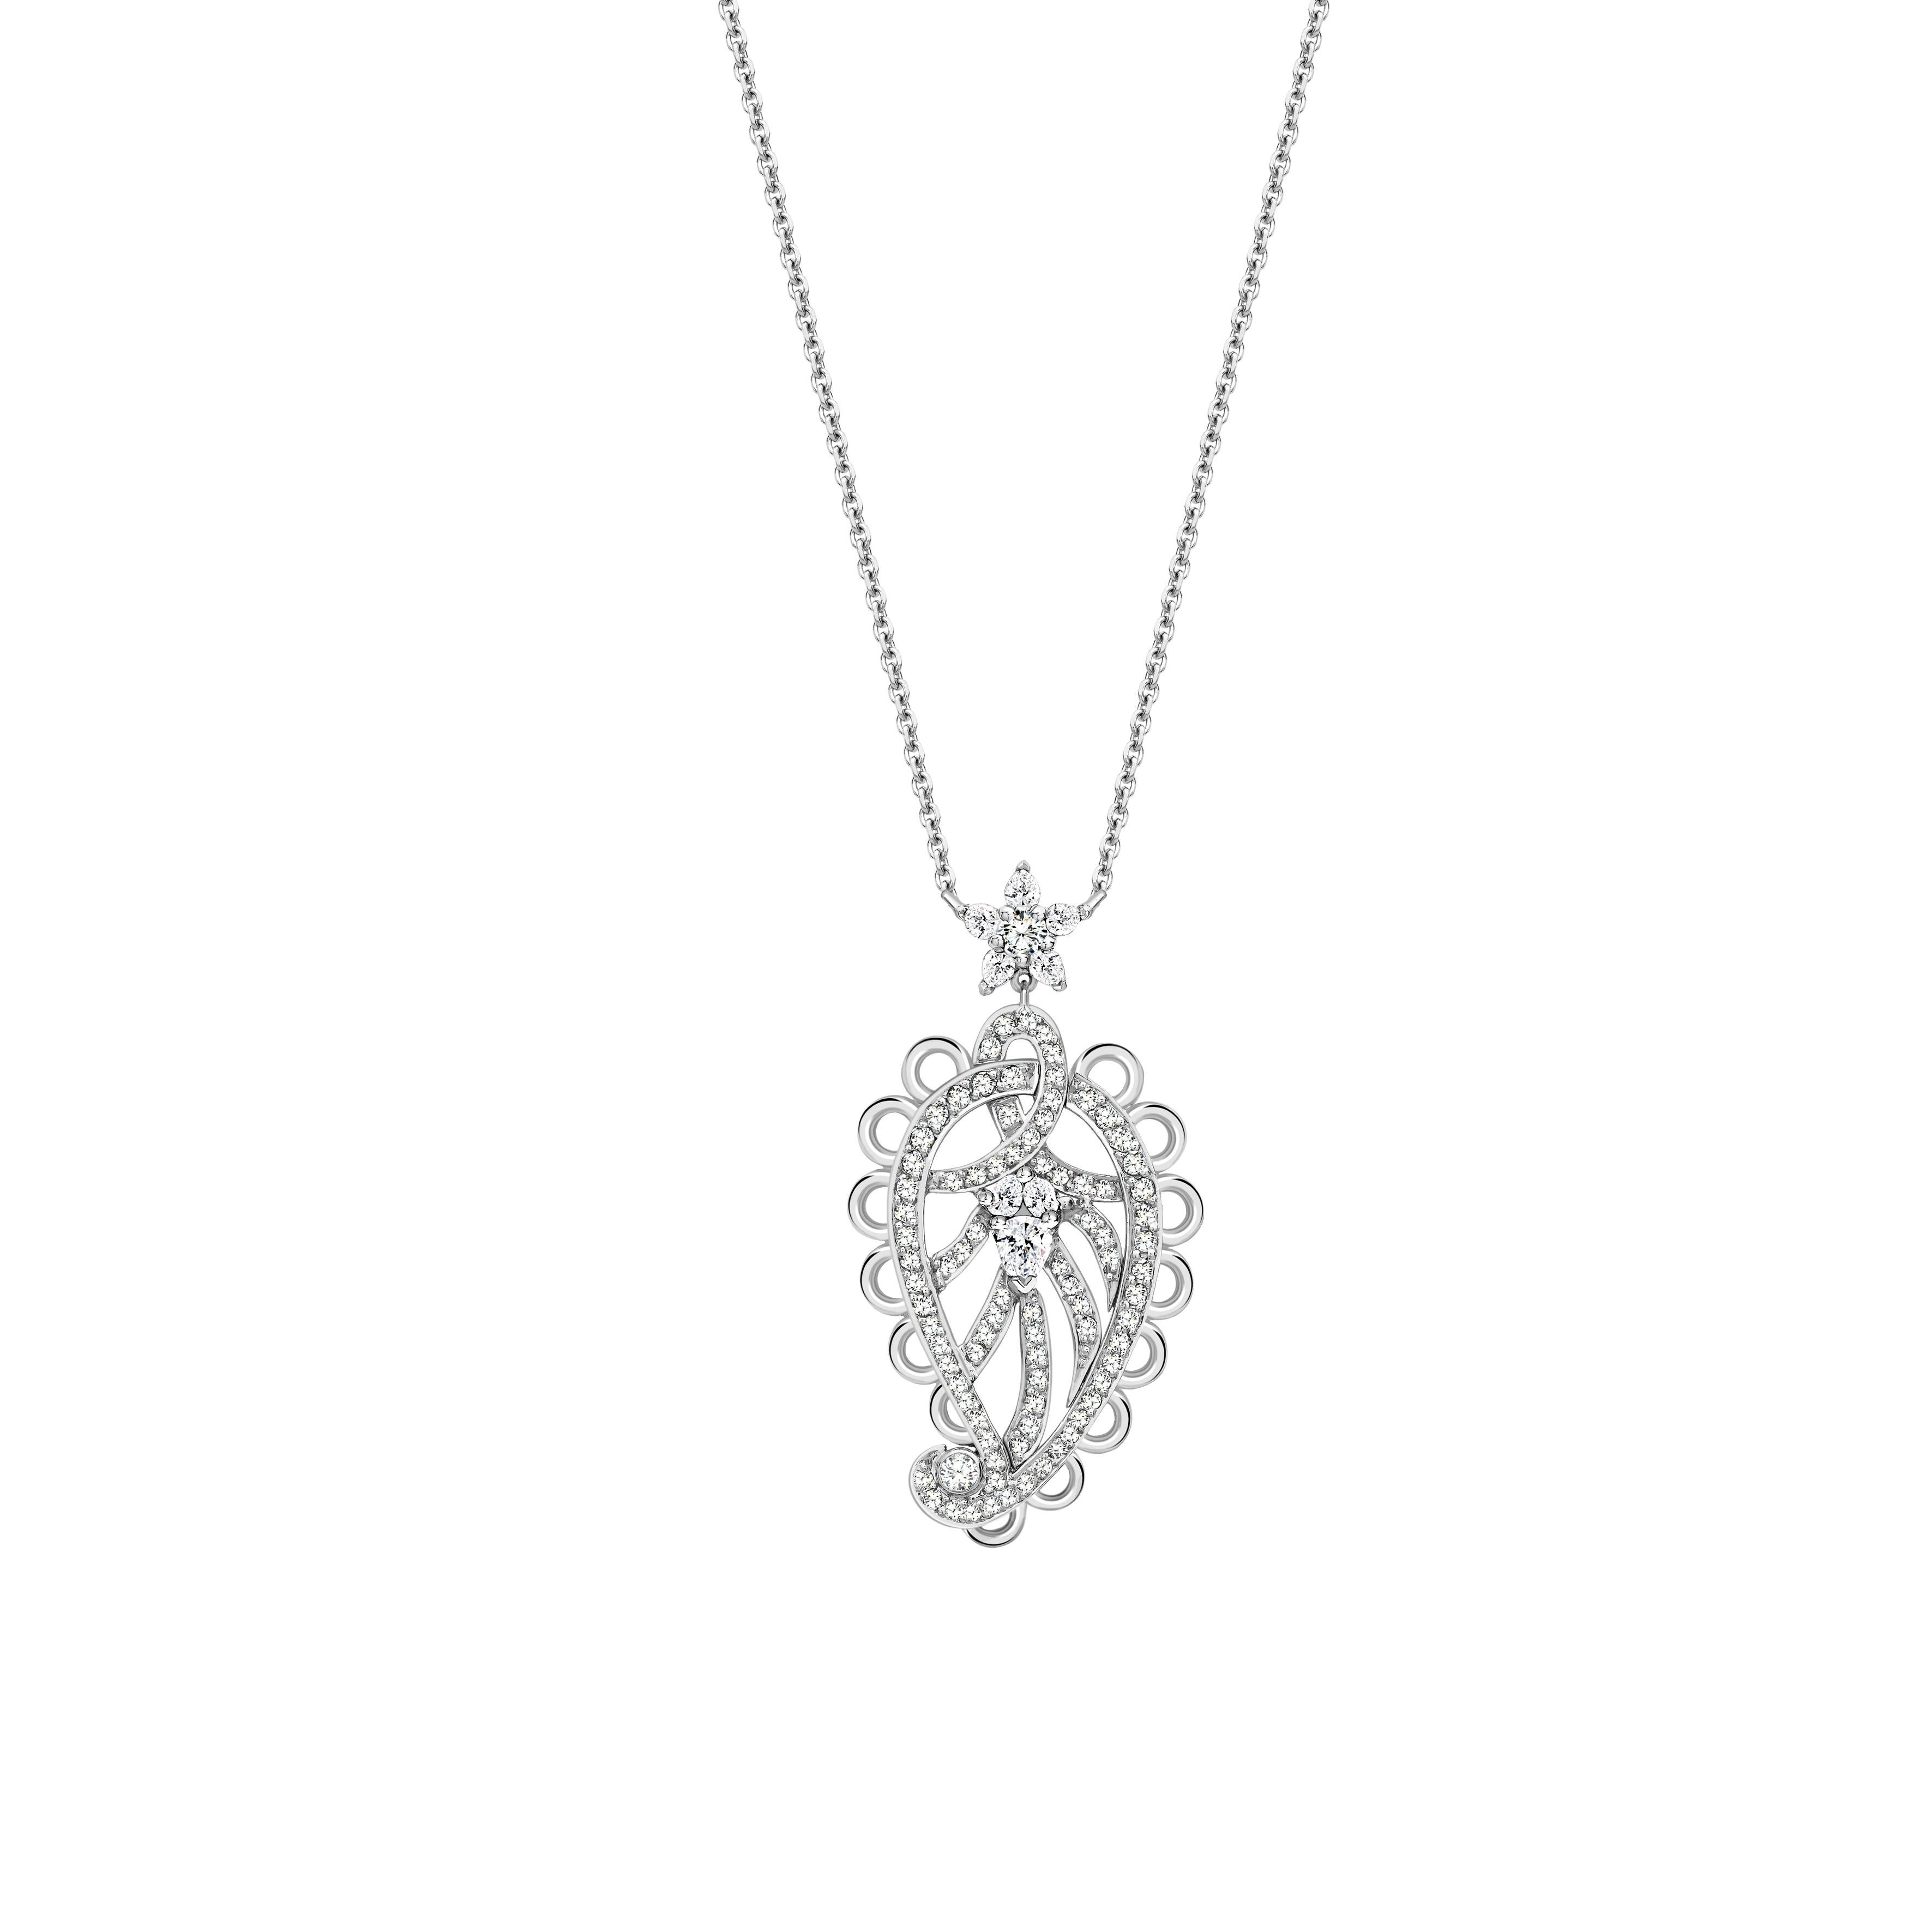 This beautiful set would make a striking statement worn together or as separate pieces. The details of each piece are as follows:

Pendant

The pendant has been hand crafted in platinum and is set with high quality white diamonds, E vs1,which total